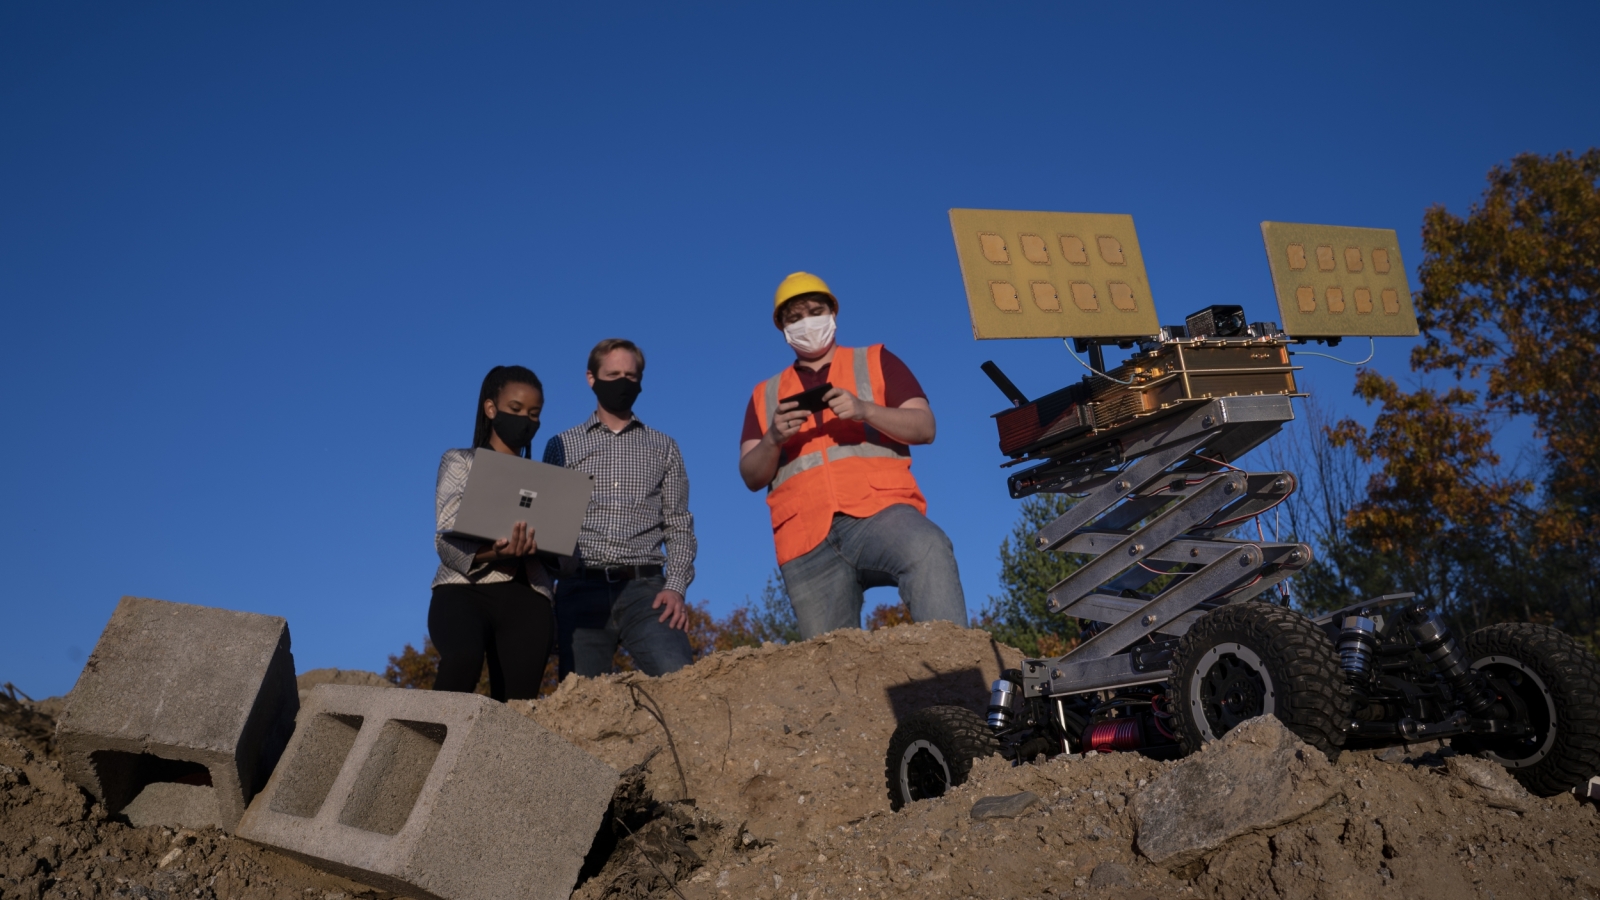 three people stand on a big dirt pile, outside, with blue sky in the background. One researcher is holding a laptop, which another looks at. The third person is holding a remote, controlling a robotic vehicle also on the dirt pile. 